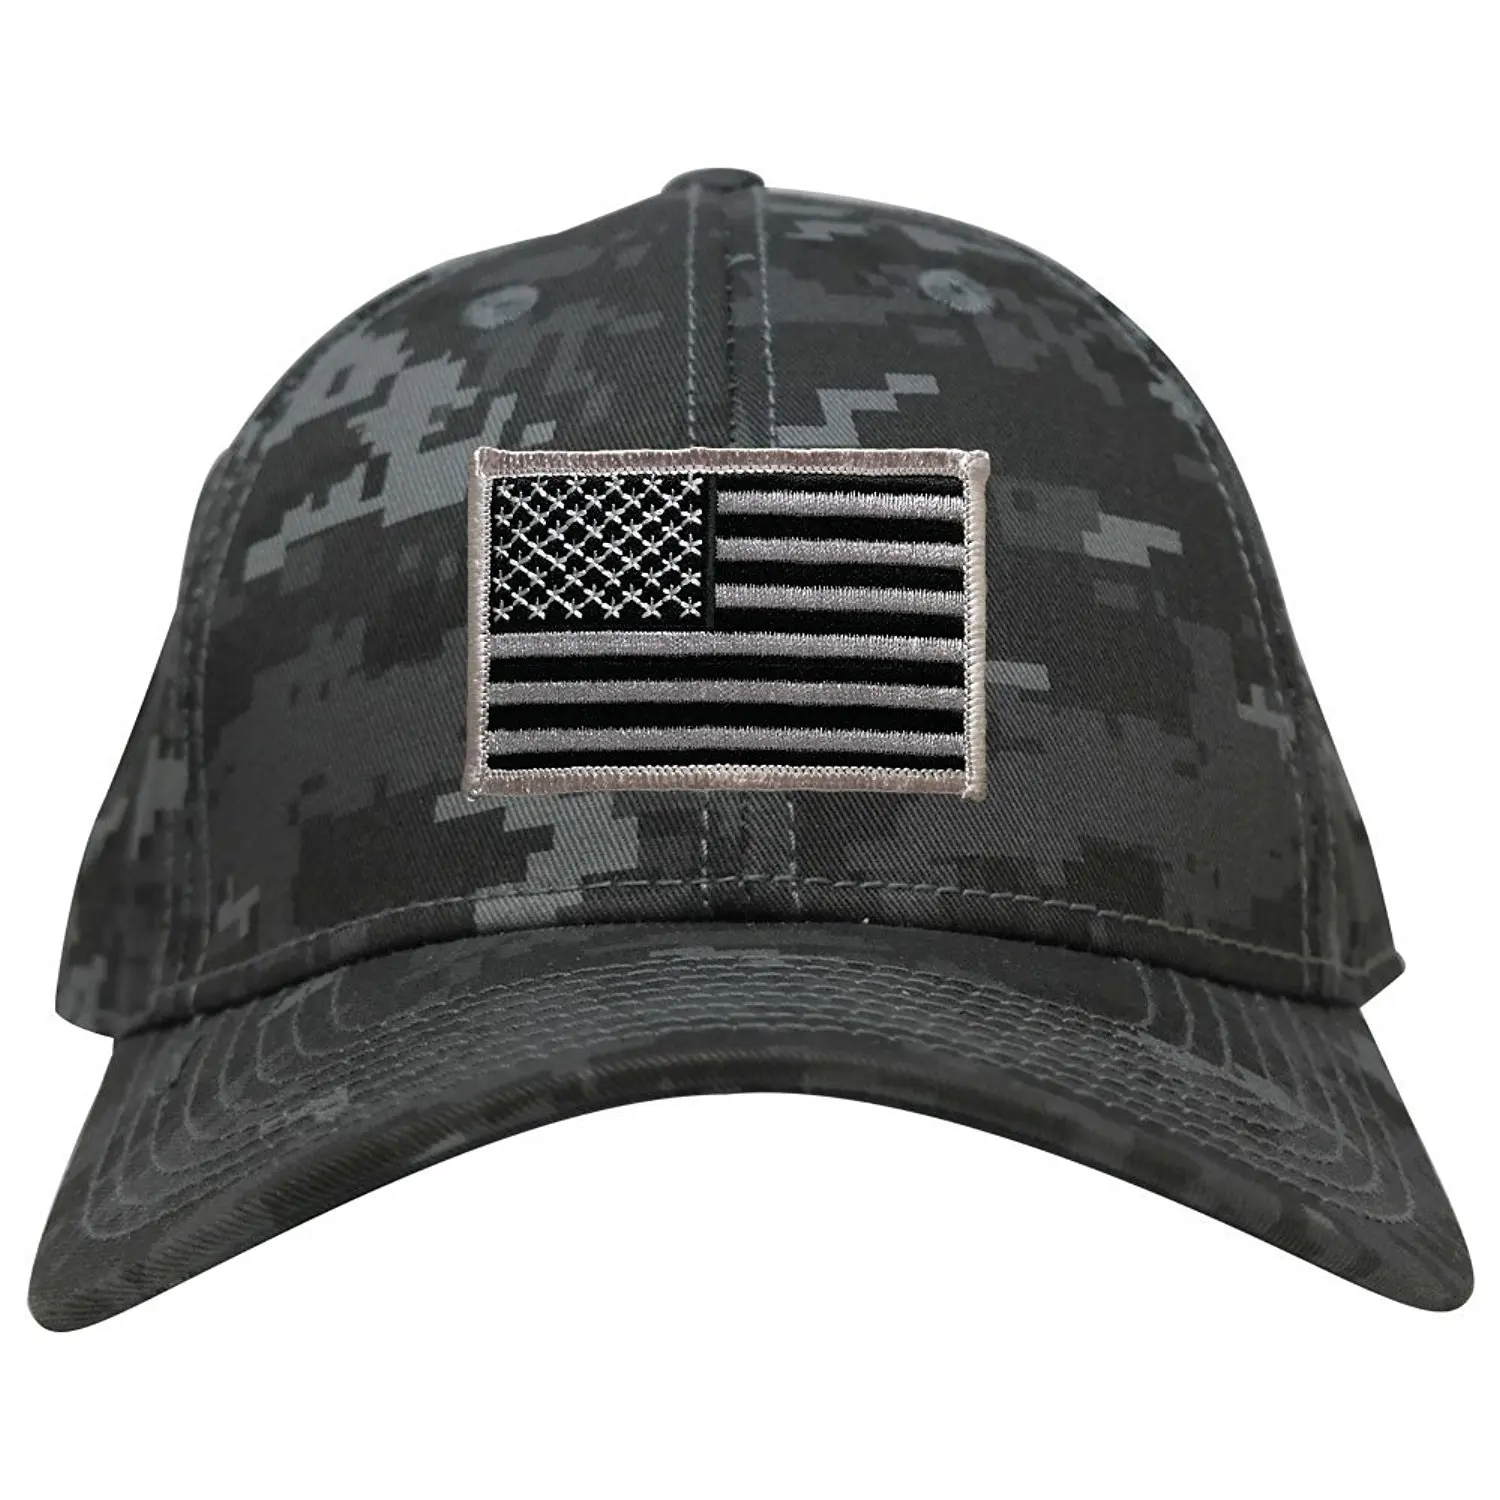 Cheap Camo Flag Patch, find Camo Flag Patch deals on line at Alibaba.com